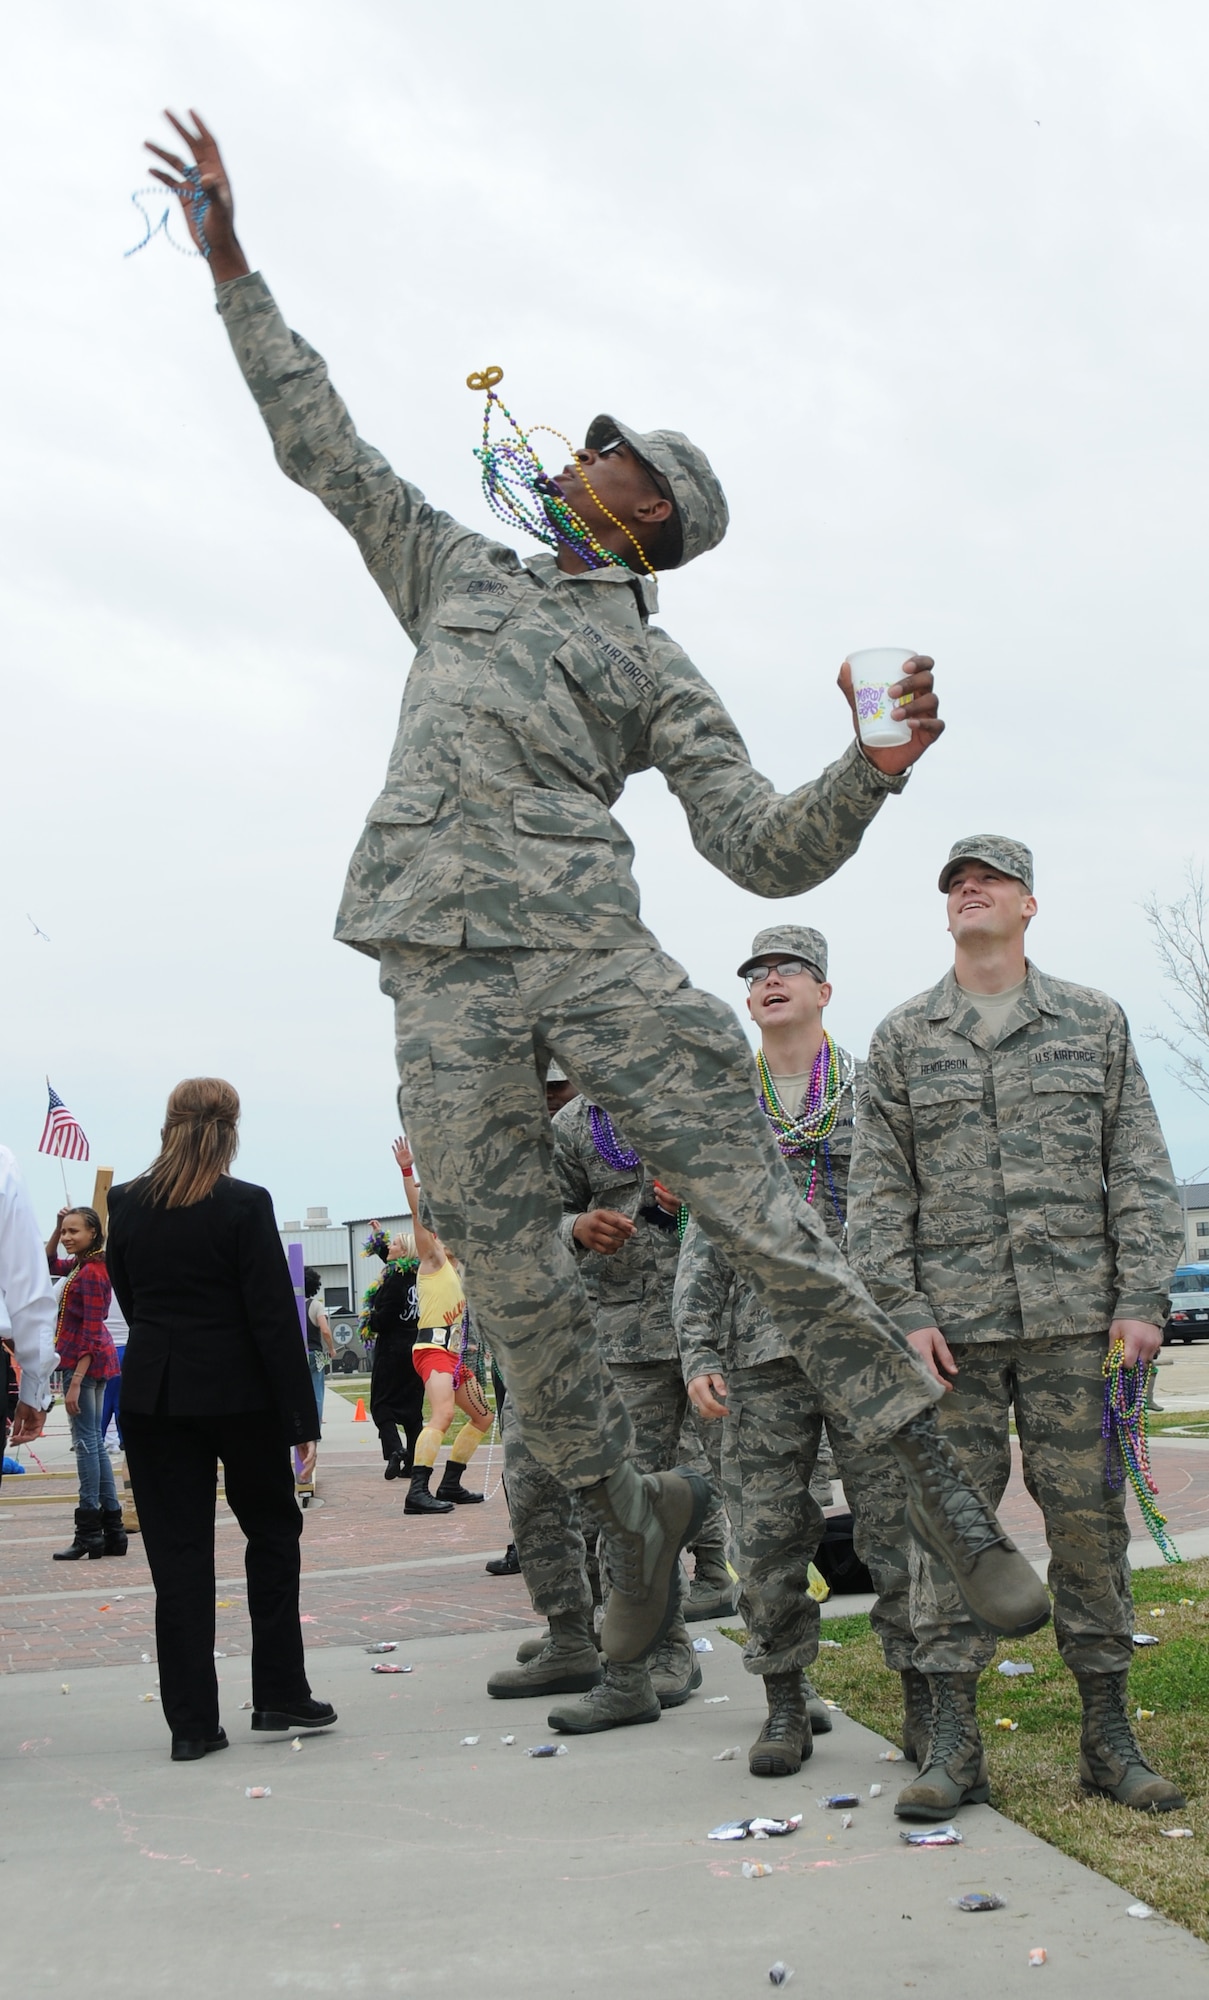 Airman Basic Jalen Edmonds, 336th Training Squadron, jumps to catch a bead after being tossed by floats during the 81st Training Group Mardi Gras parade Feb. 10, 2012, between Thomson Hall and Matero Hall at Keesler Air Force Base, Biloxi, Miss.  (U.S. Air Force photo by Kemberly Groue)